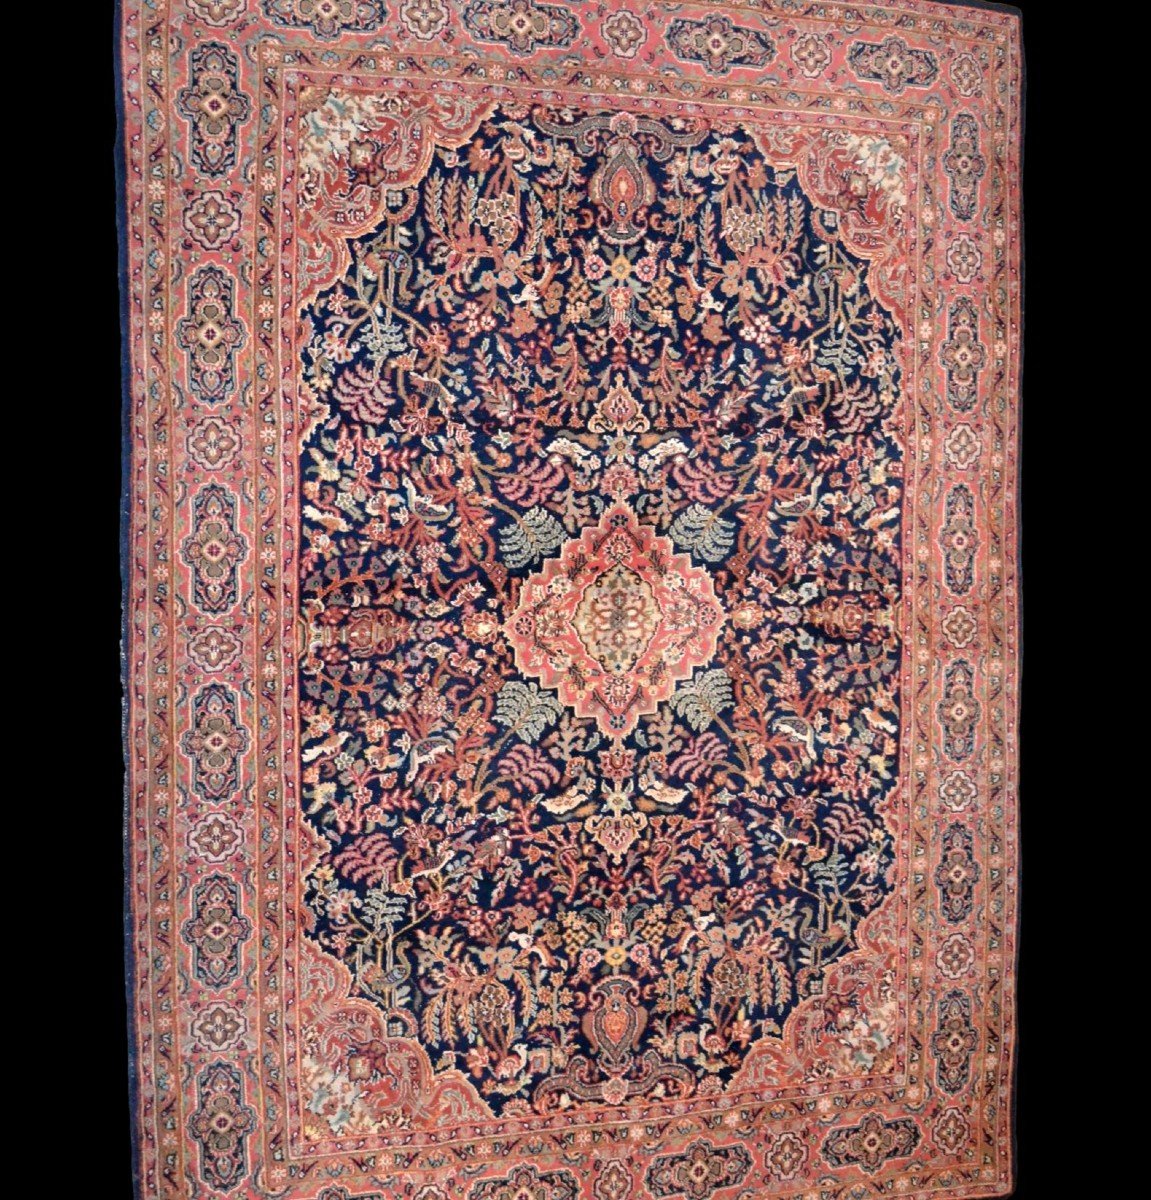 Tabriz Indo-persia, 151 Cm X 211 Cm, Hand-knotted Wool, Superb Decor, Very Good Condition Circa 1980